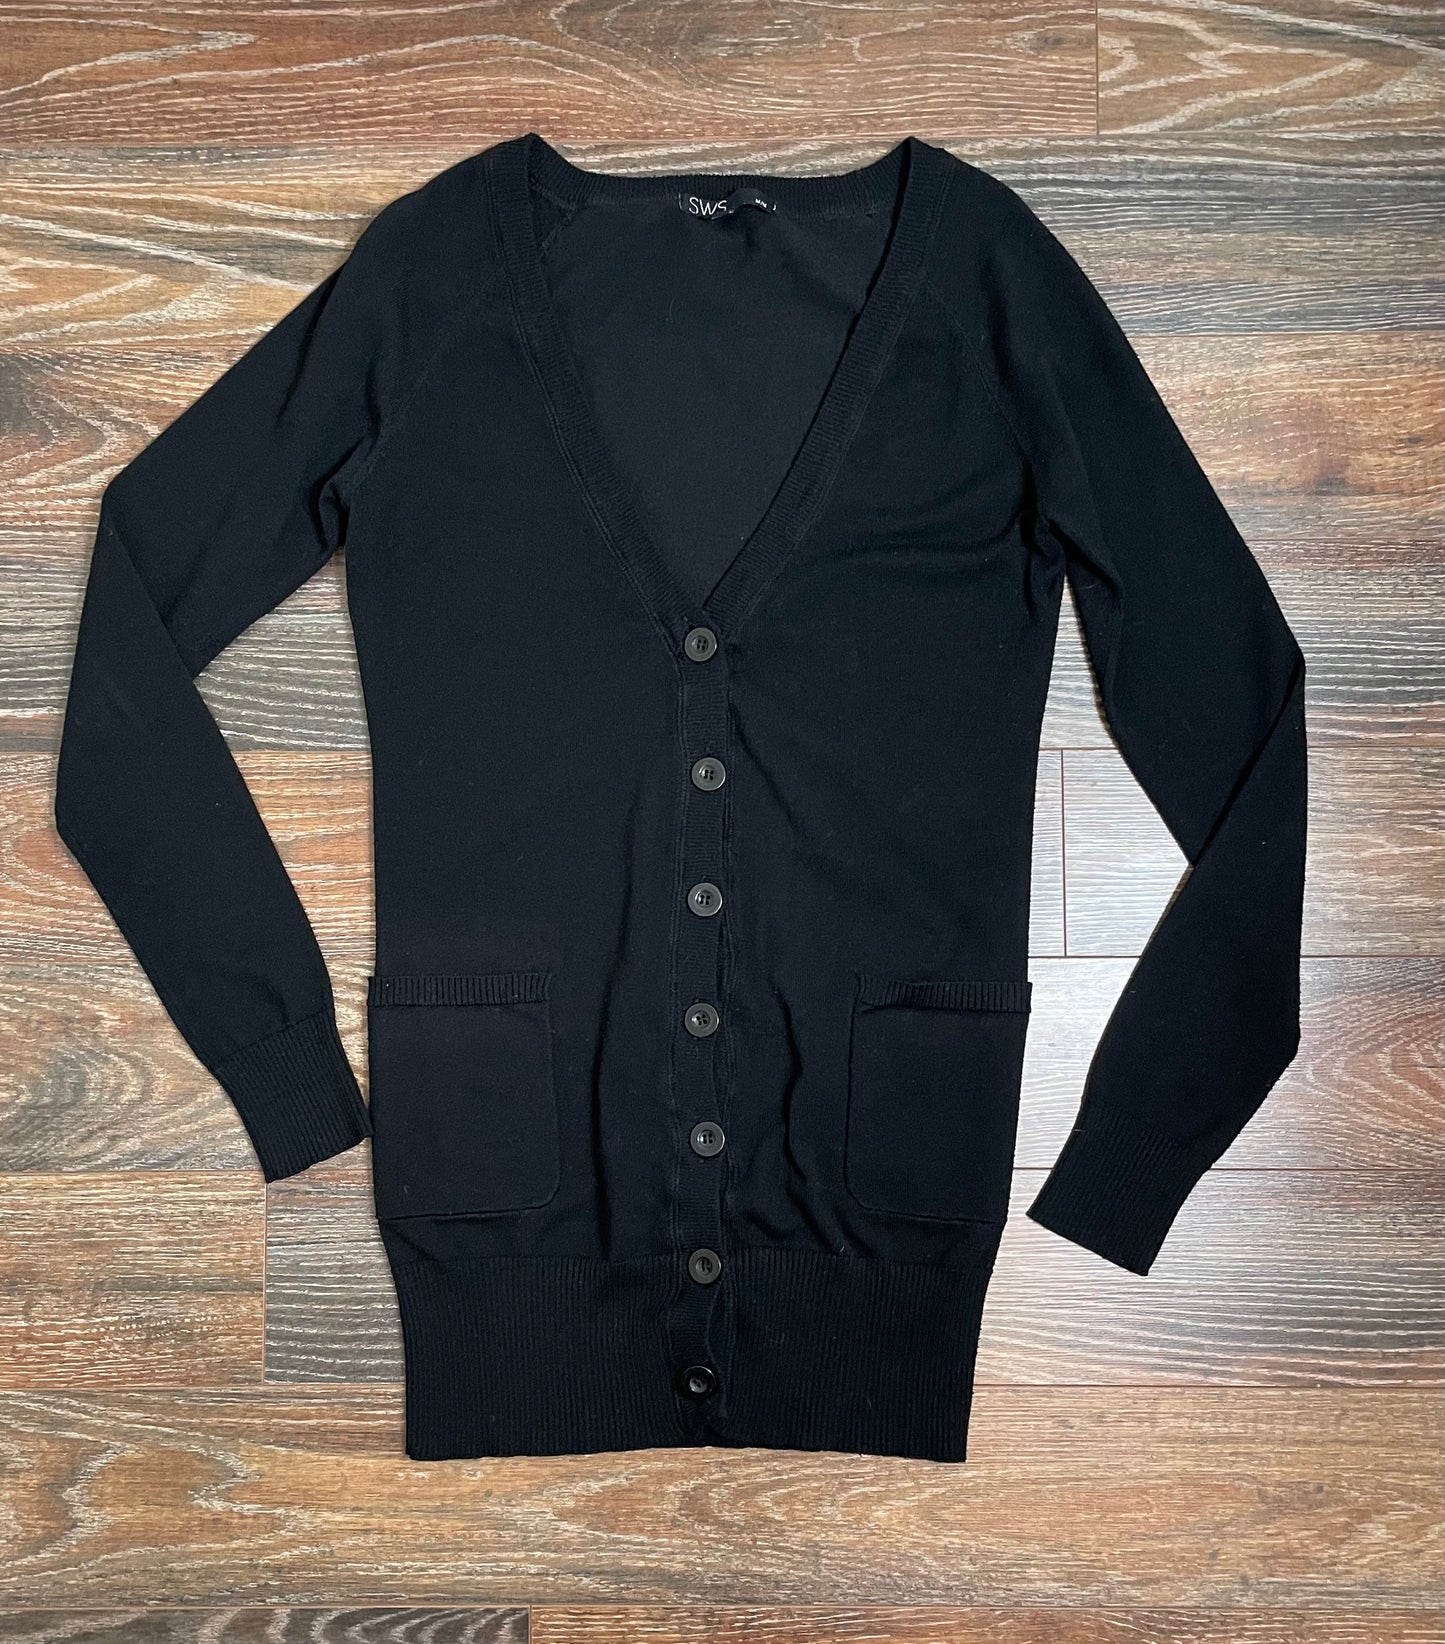 SWS Long Black Button Up Cardigan